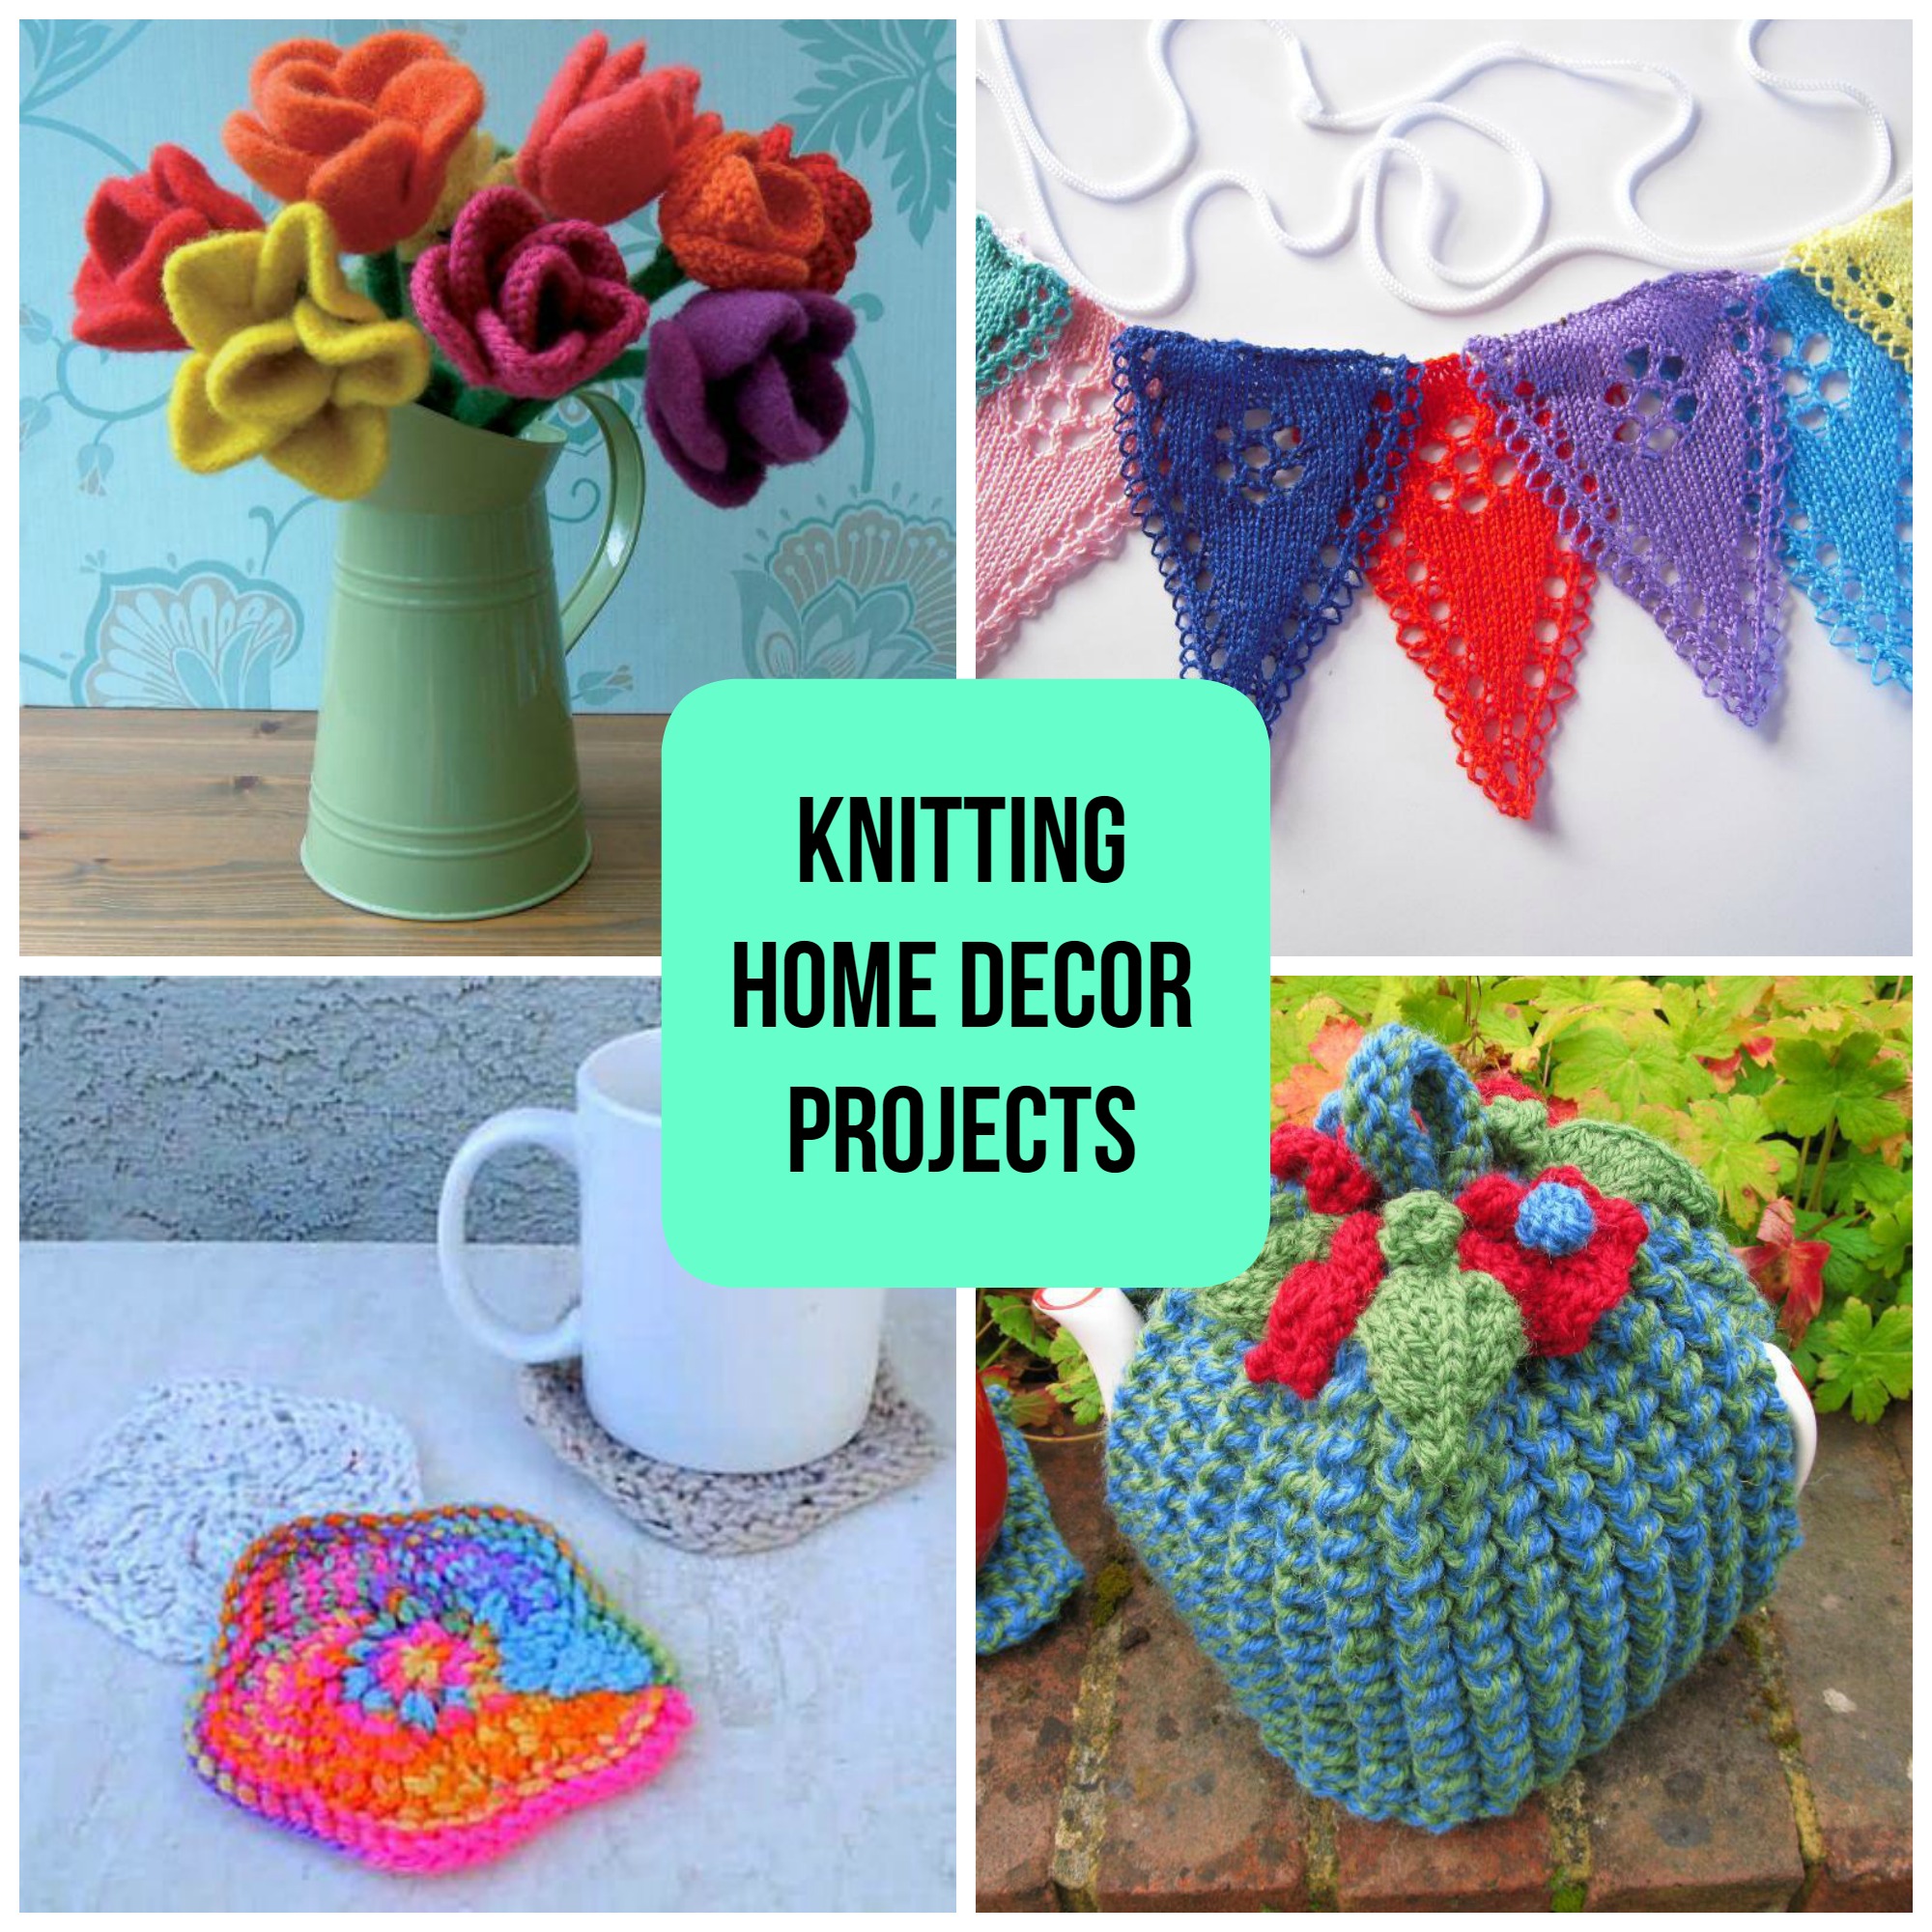 Knitting Home Decor Projects